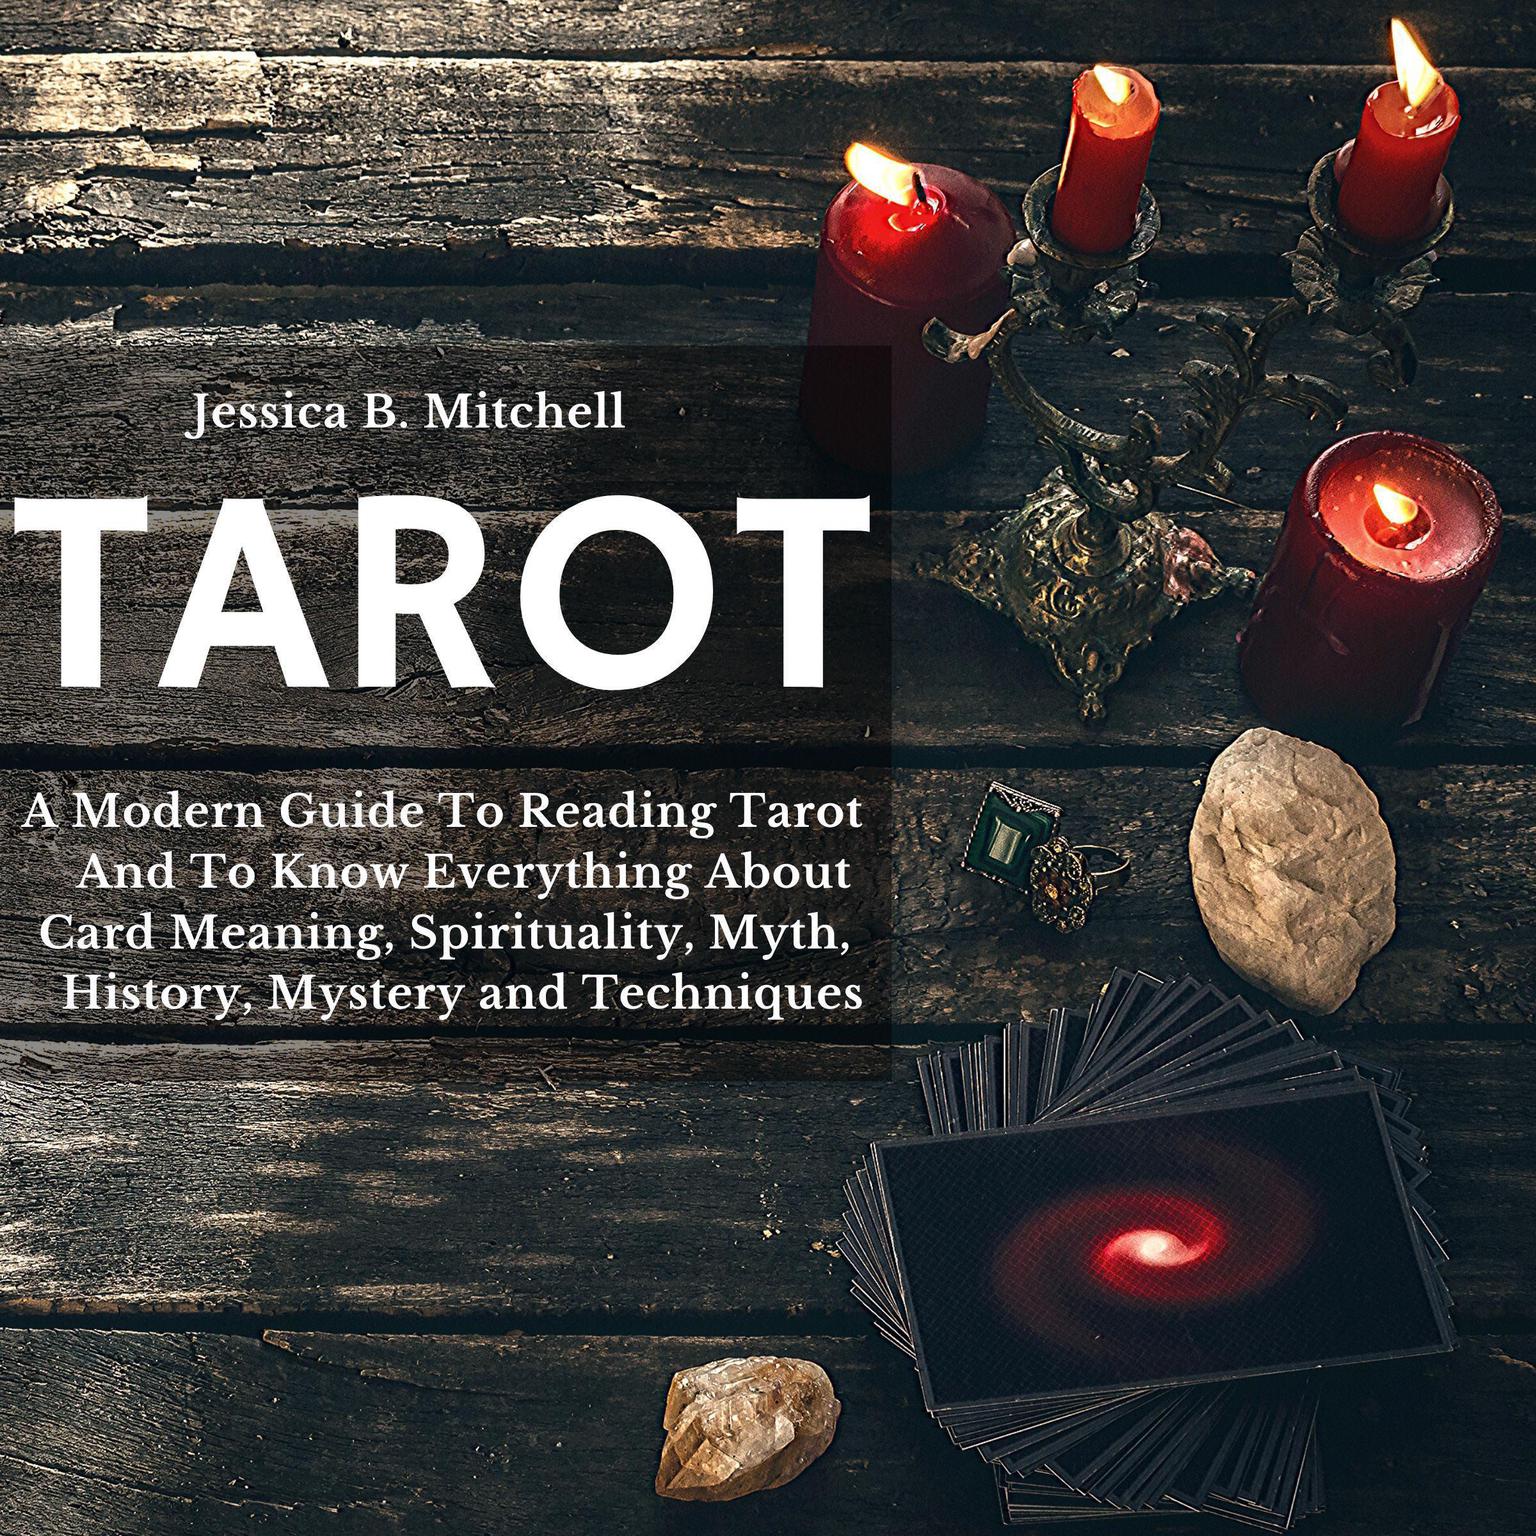 Tarot A Modern Guide To Reading Tarot And To Know Everything About Card Meaning, Spirituality, Myth, History, Mystery and Techniques Audiobook, by Jessica B. Mitchell